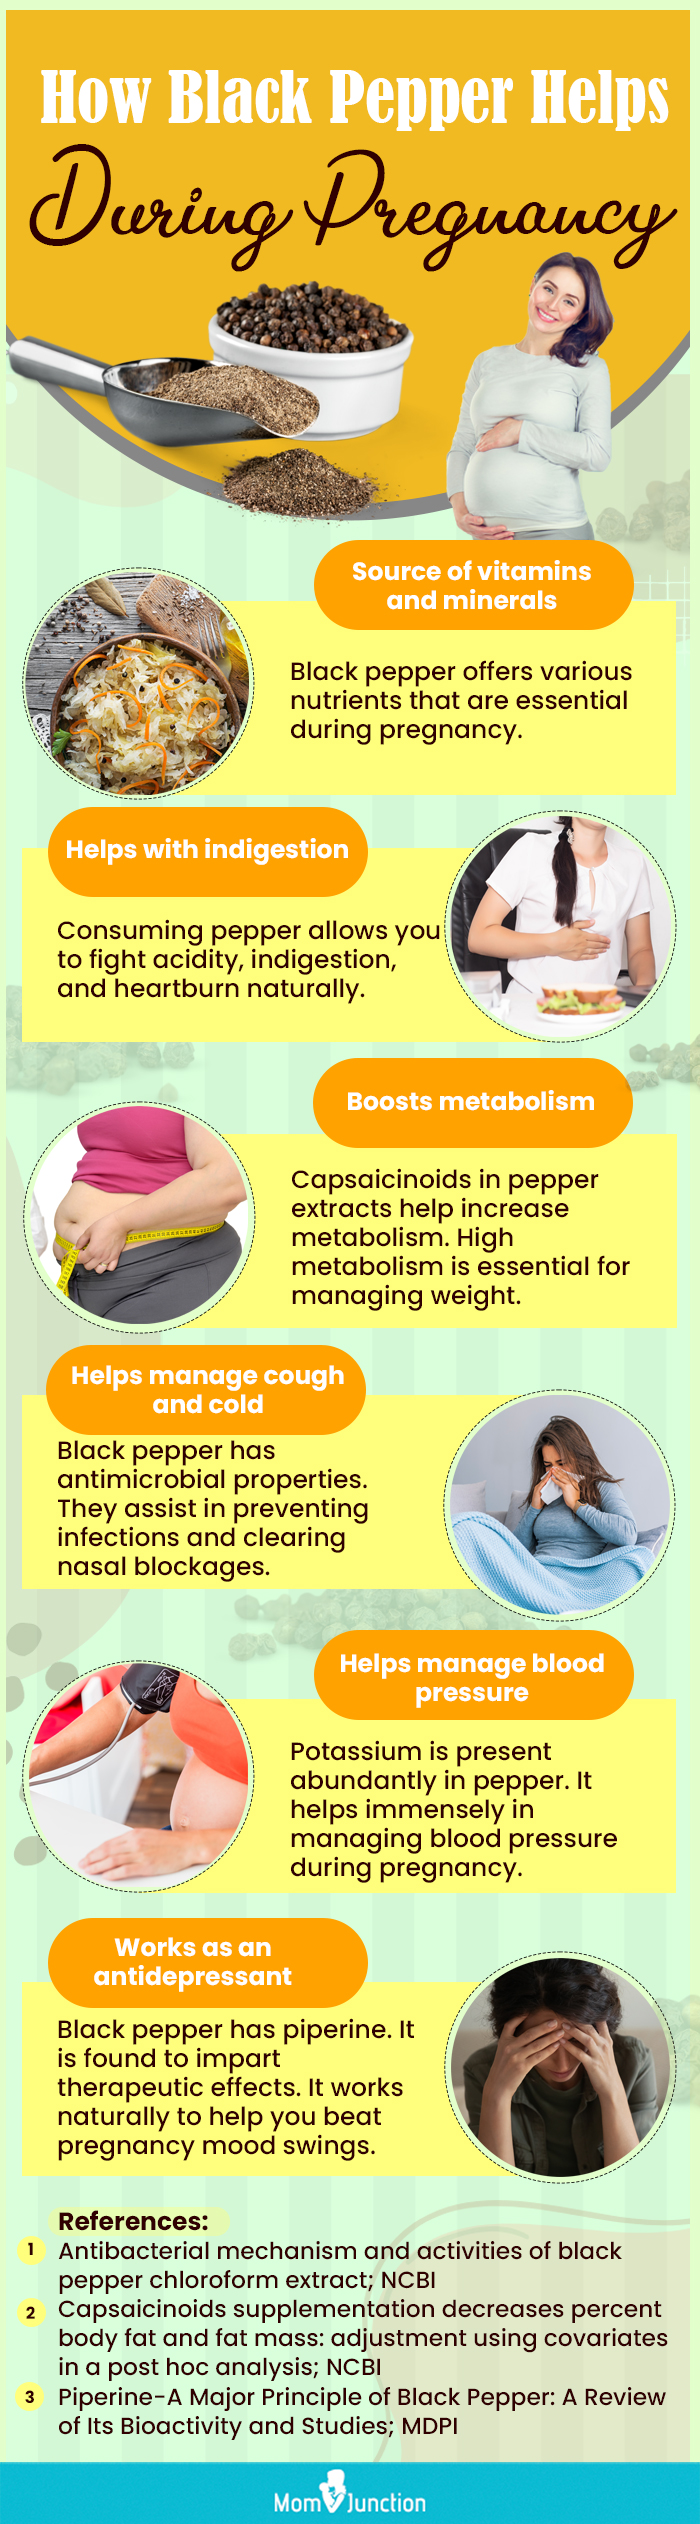 how black pepper helps during pregnancy (infographic)